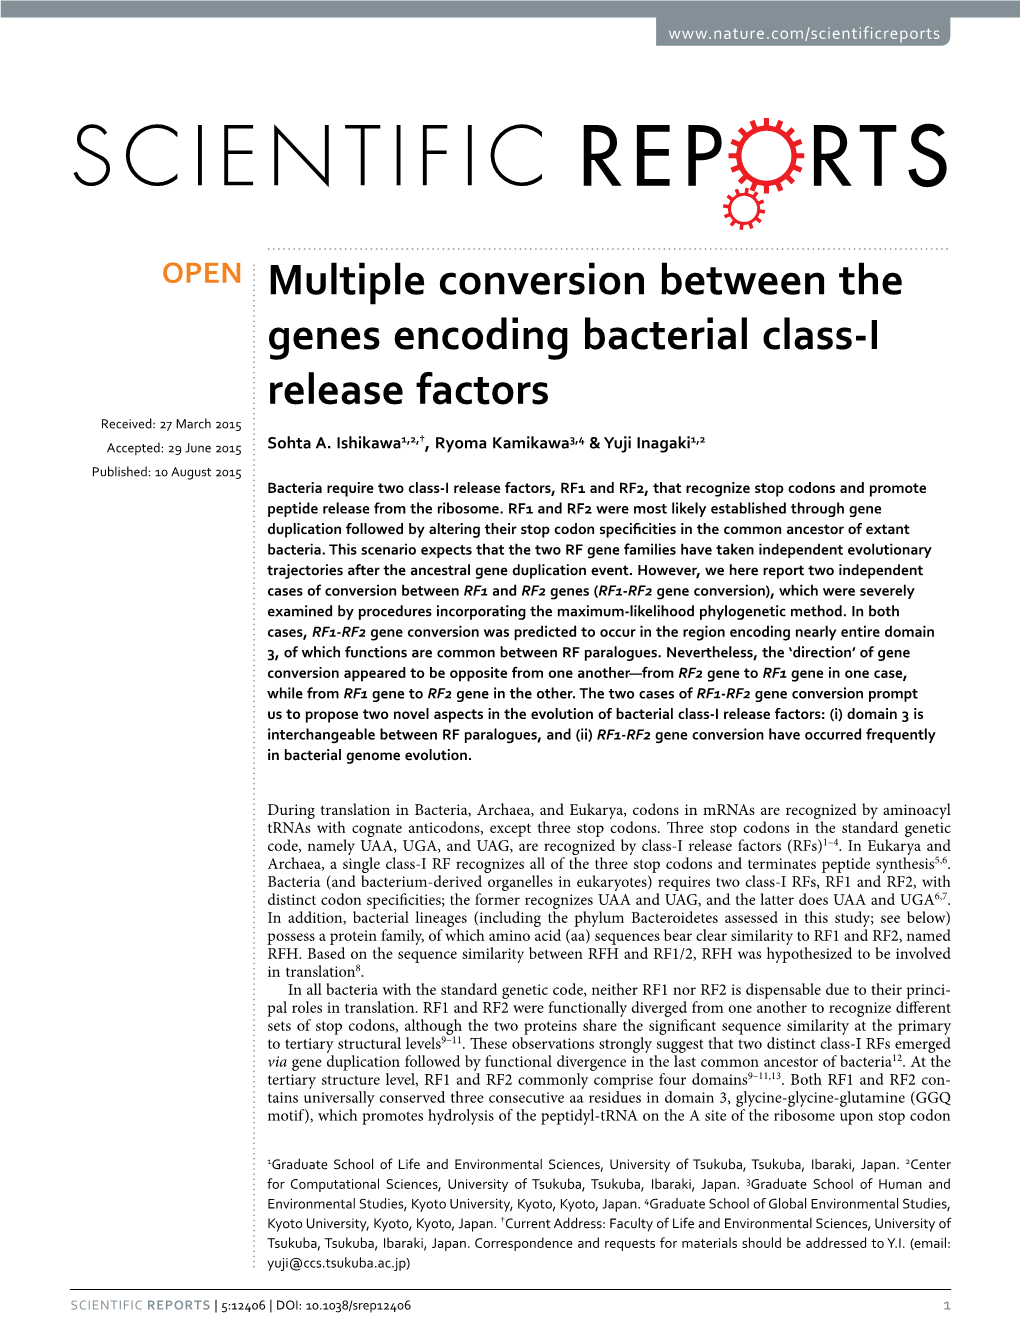 Multiple Conversion Between the Genes Encoding Bacterial Class-I Release Factors Received: 27 March 2015 1,2,† 3,4 1,2 Accepted: 29 June 2015 Sohta A